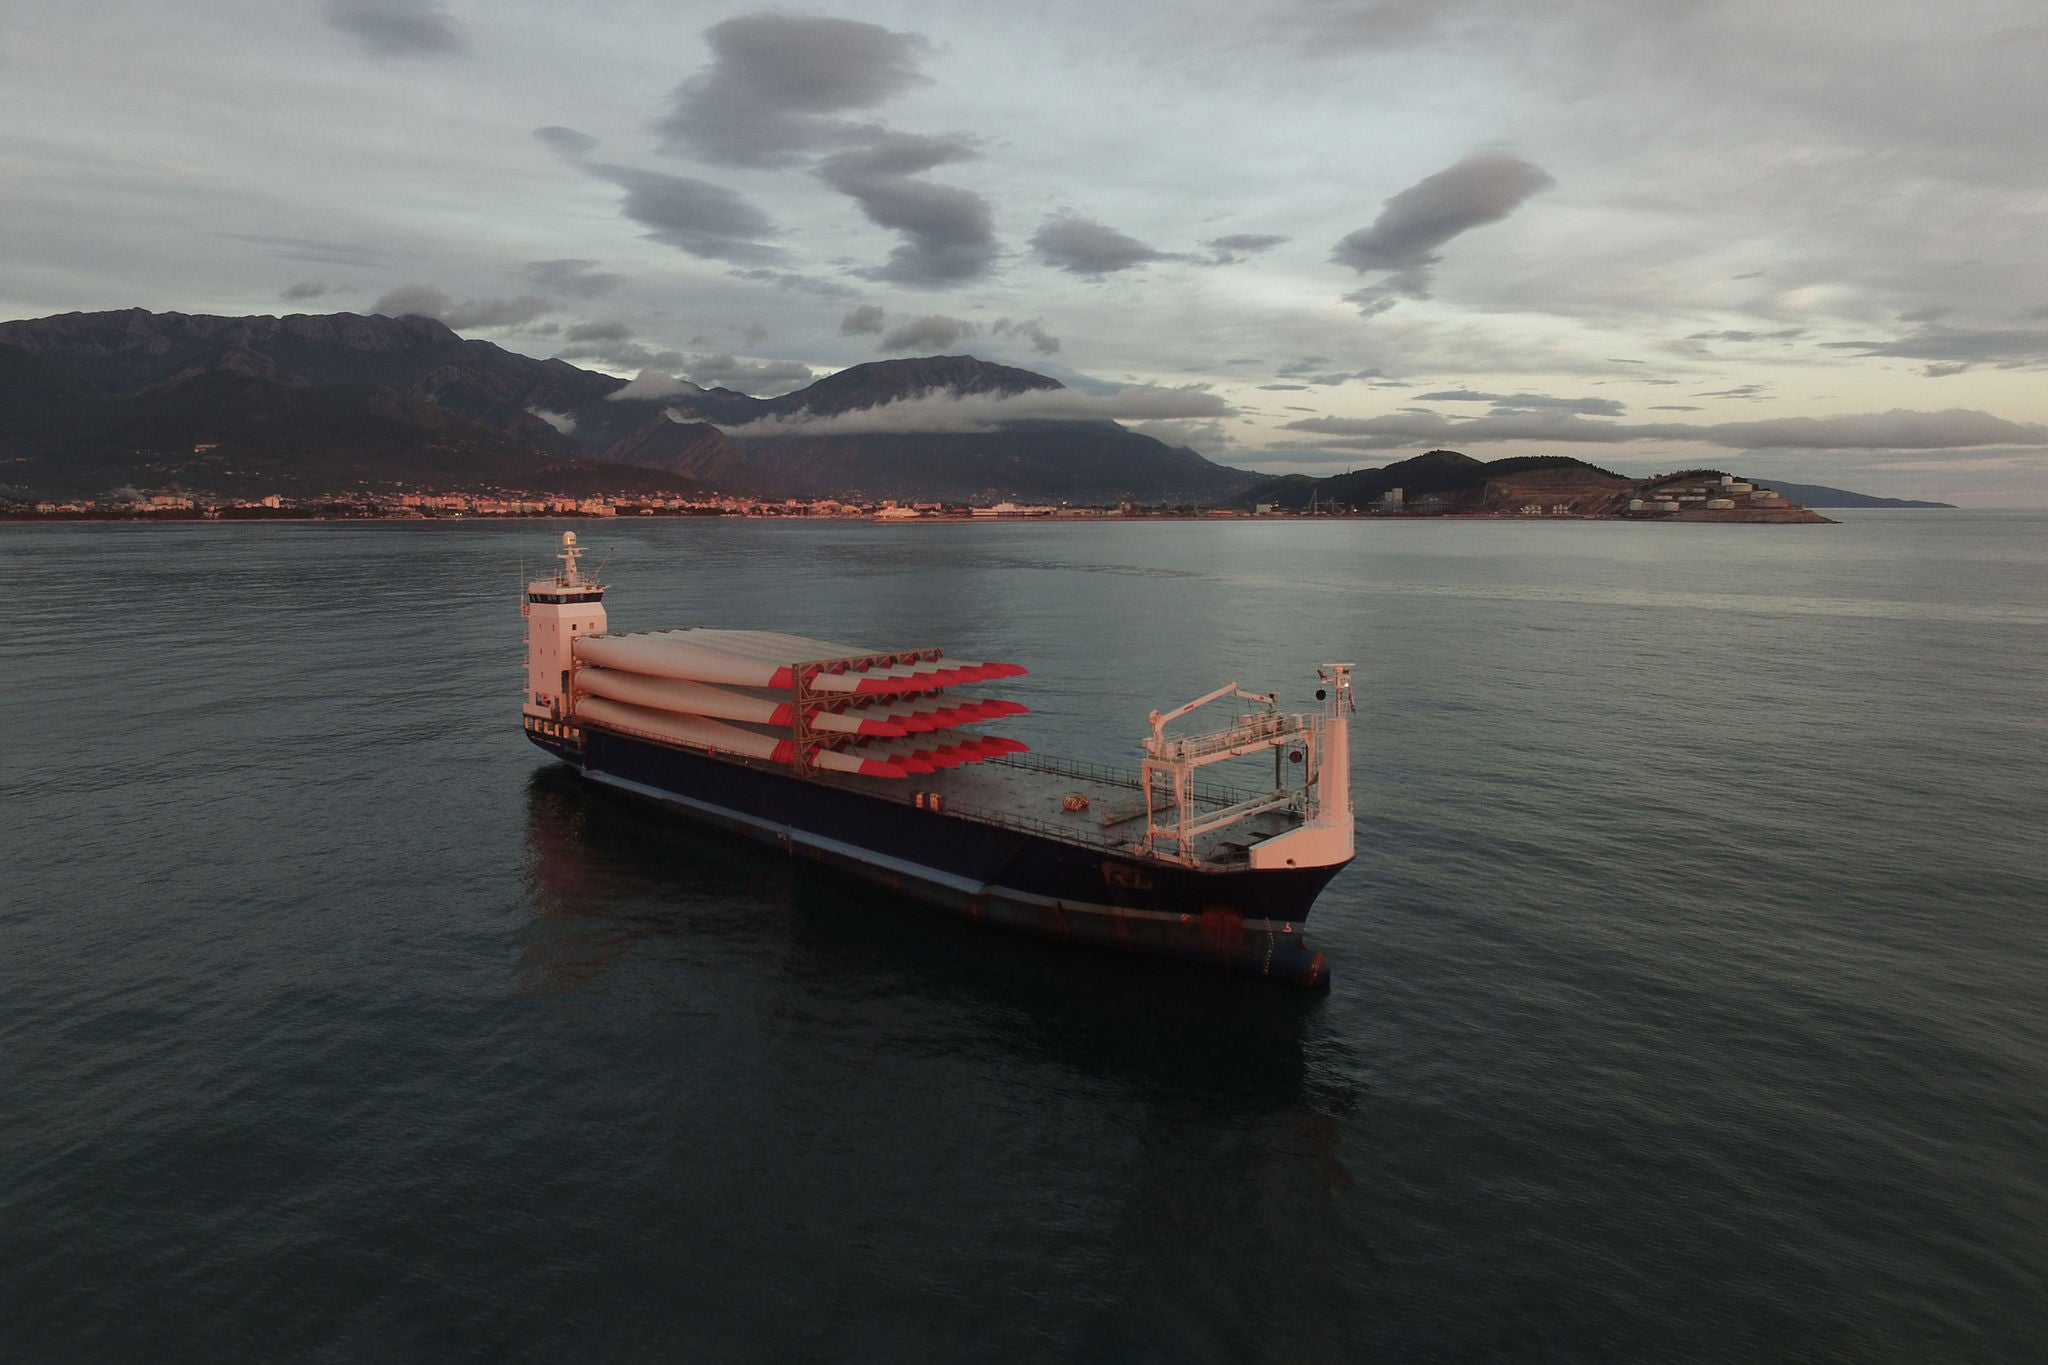 EY aerial view of a cargo vessel loaded